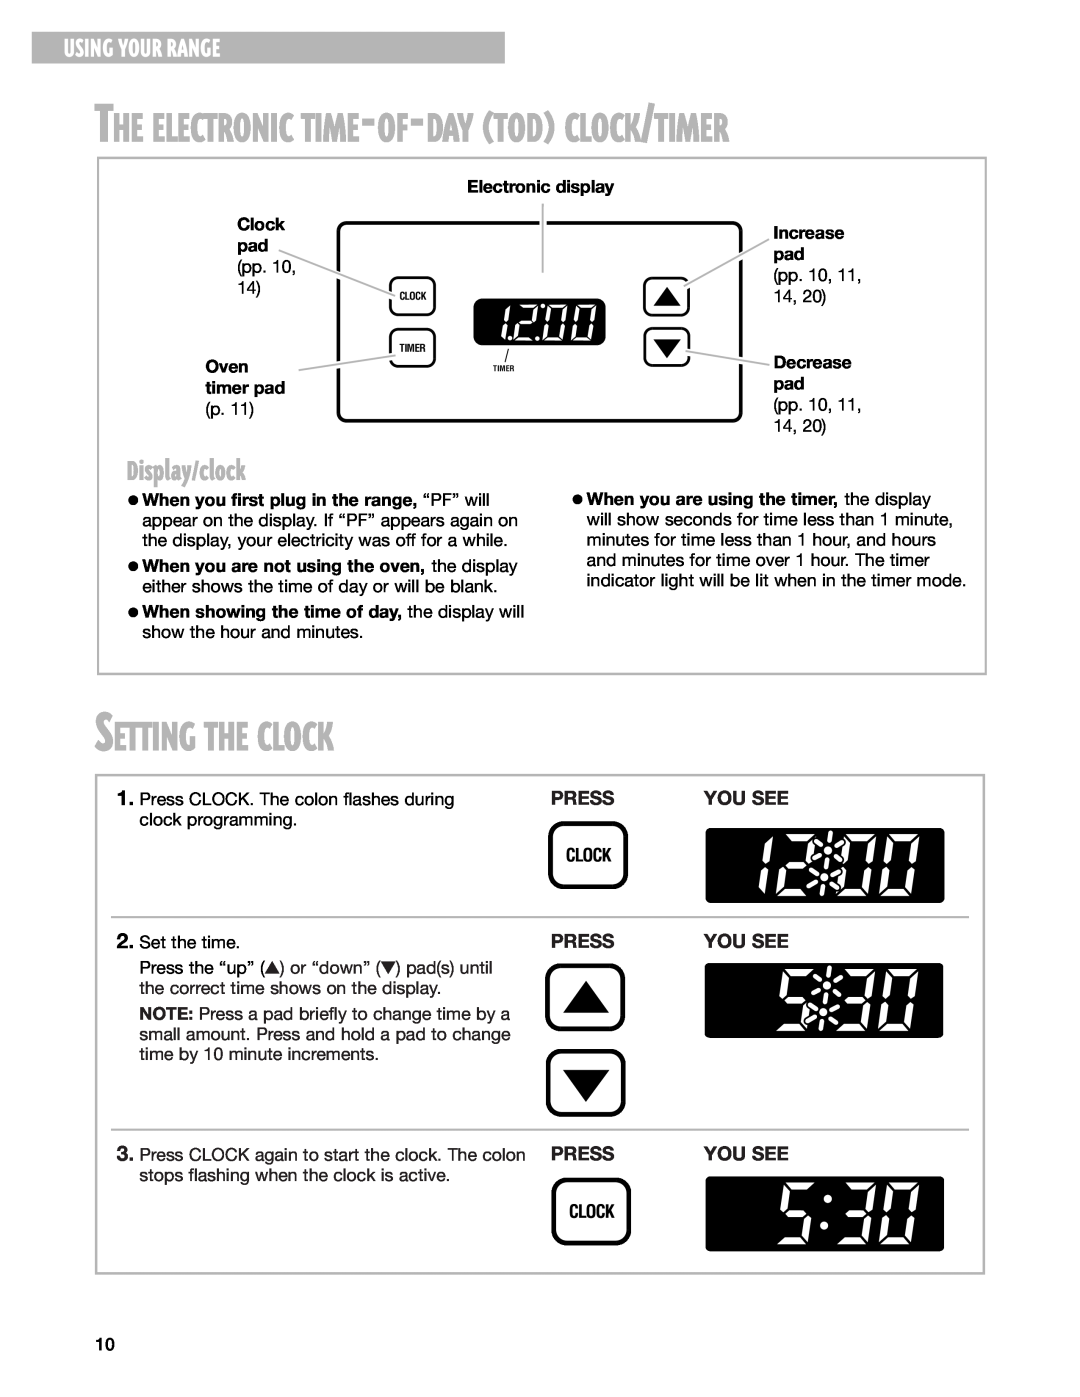 Whirlpool SF362BEG Setting The Clock, Display/clock, The Electronic Time-Of-Day Tod Clock/Timer, Using Your Range, Press 